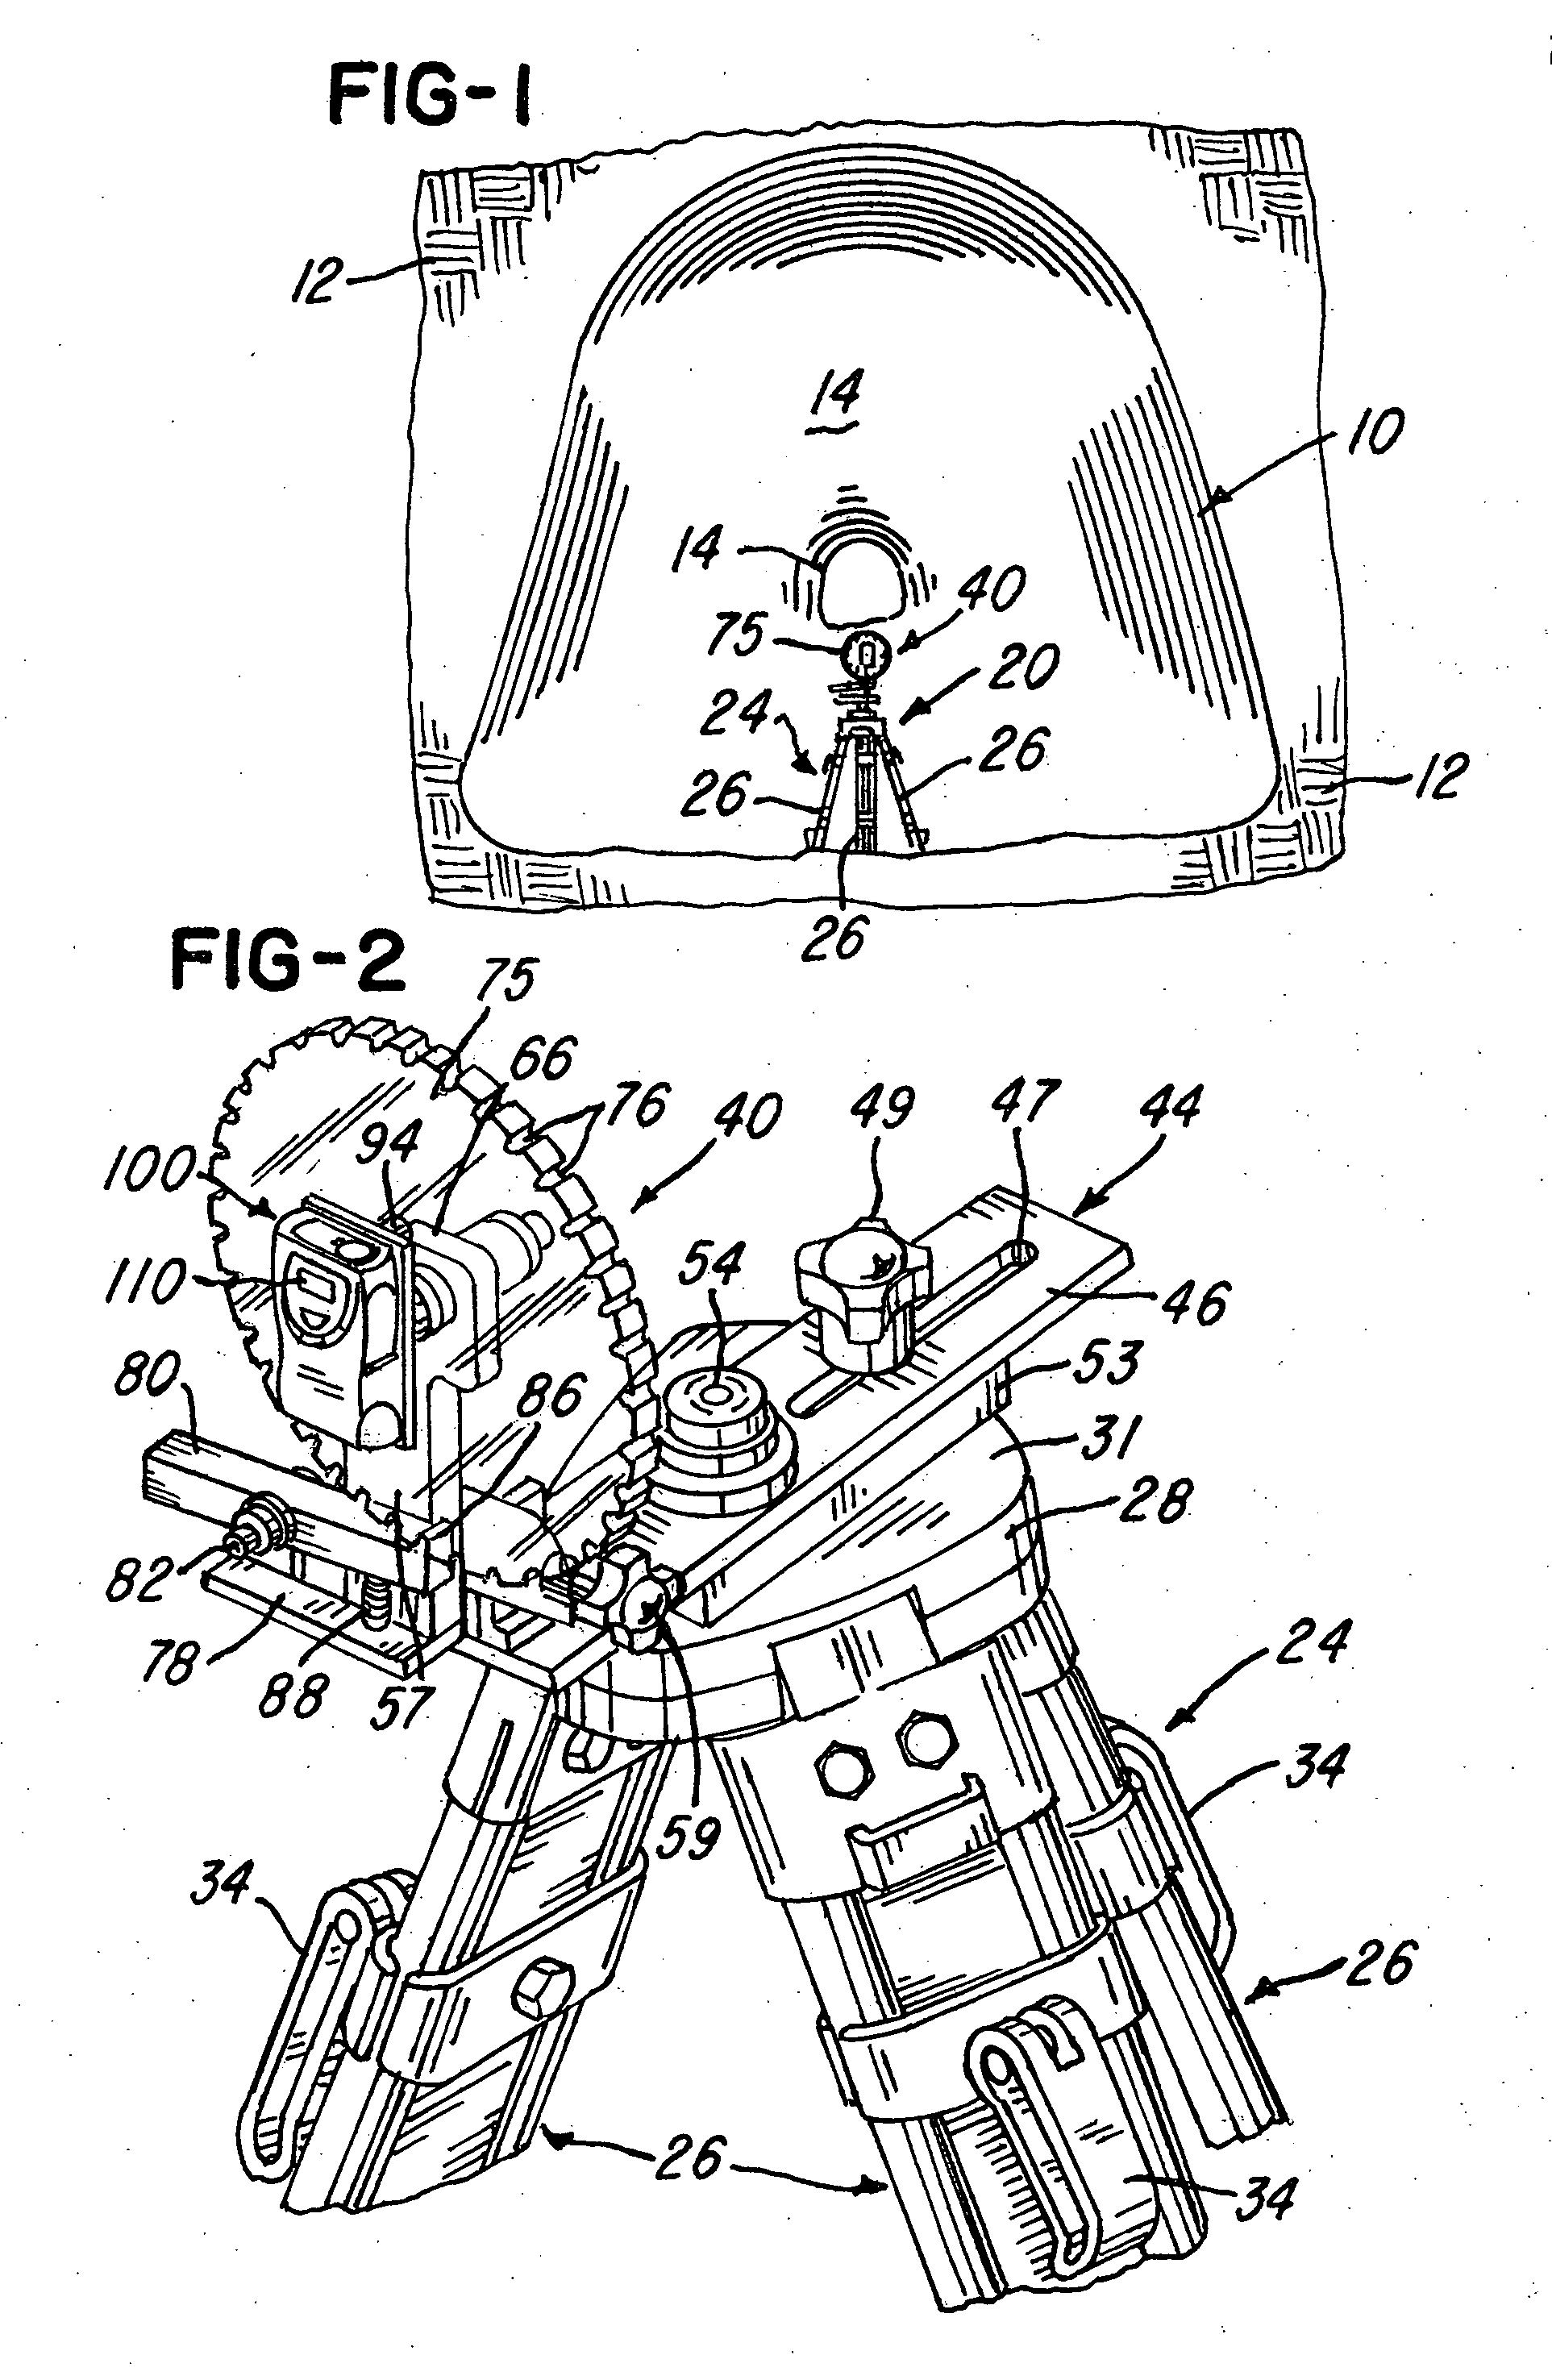 Apparatus for measuring the inner surface of a culver or other tunnel defining structure imbedded in the ground